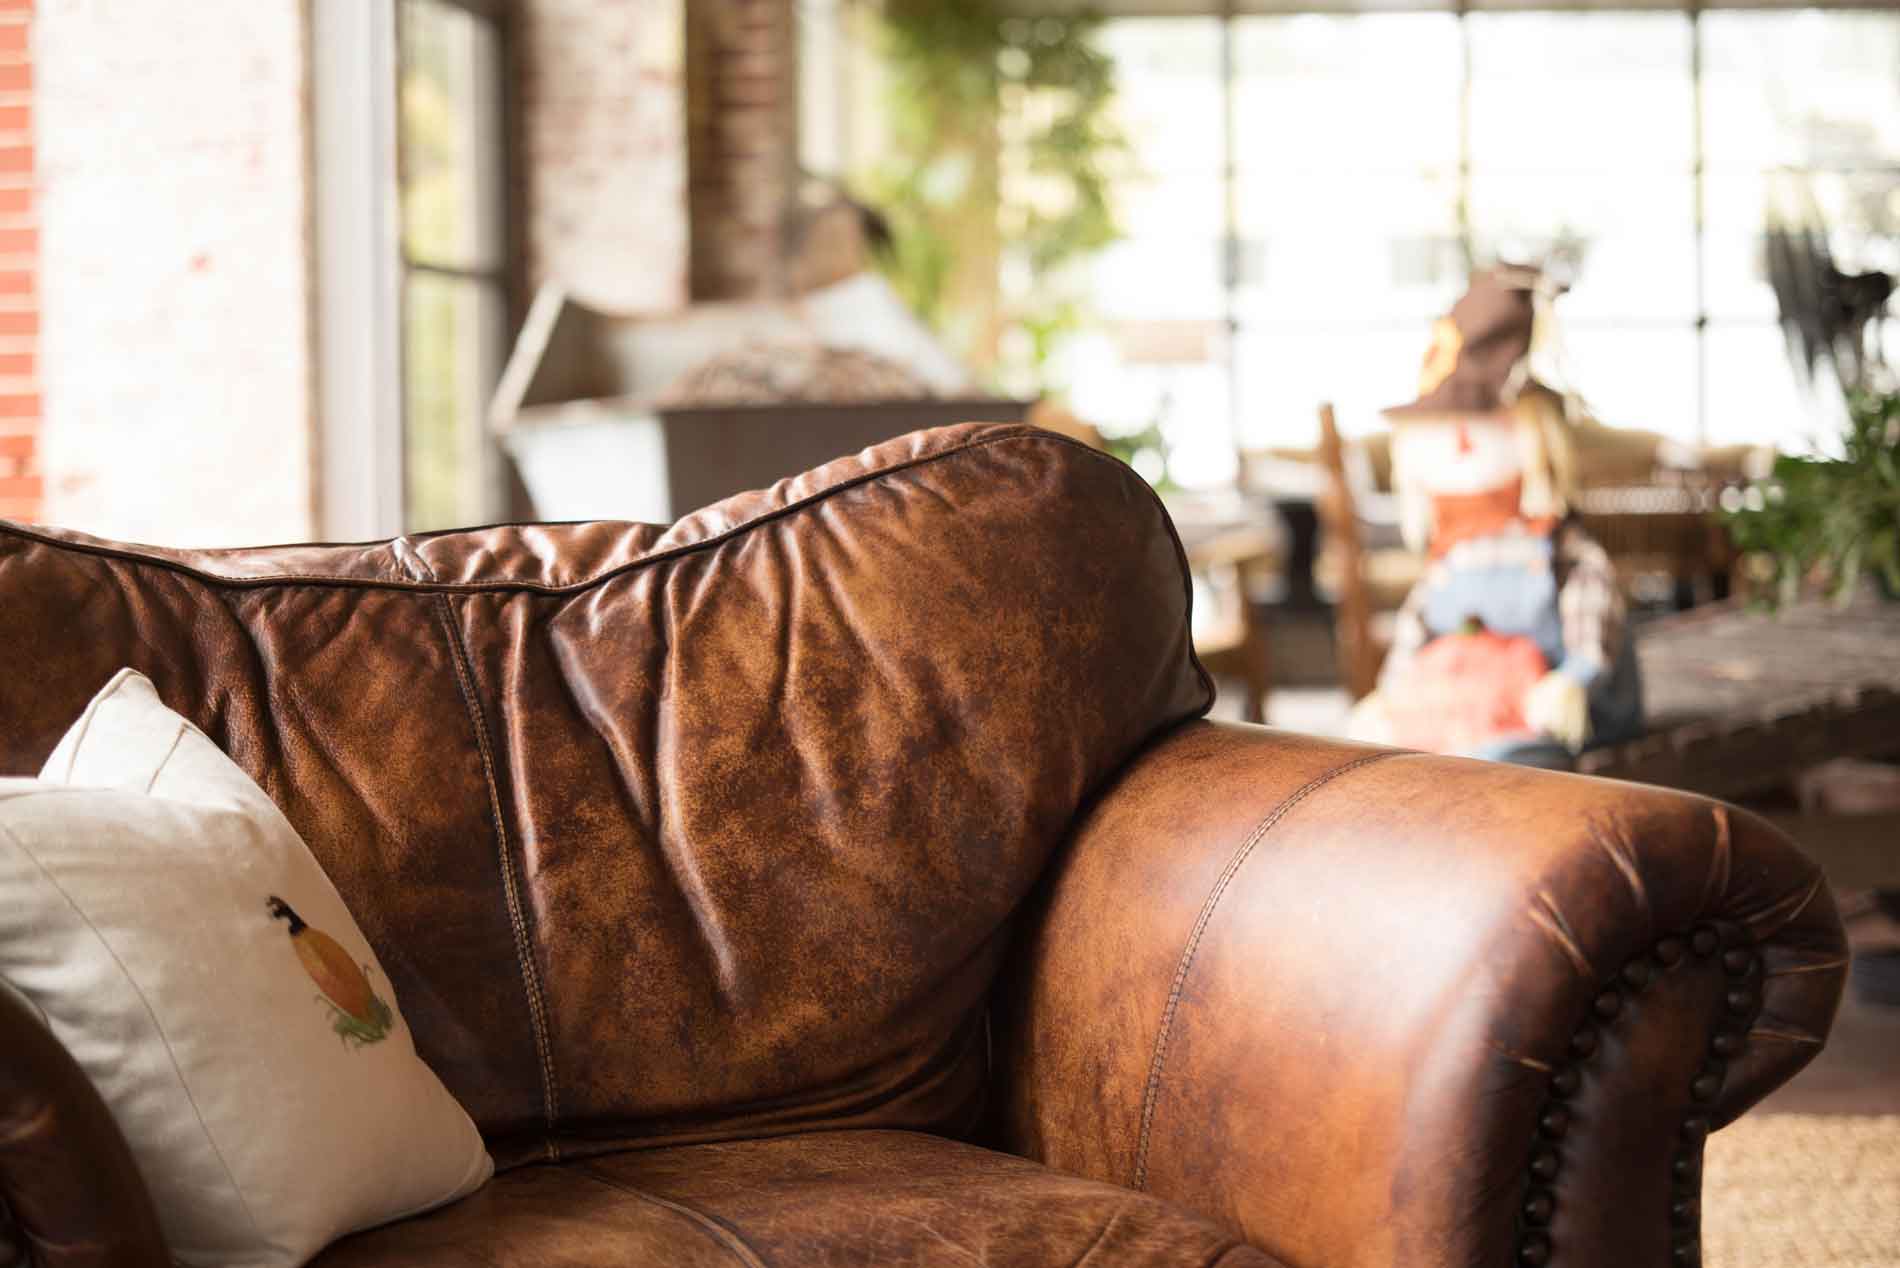 How To Keep Real Leather Upholstery, Leather For Furniture Upholstery